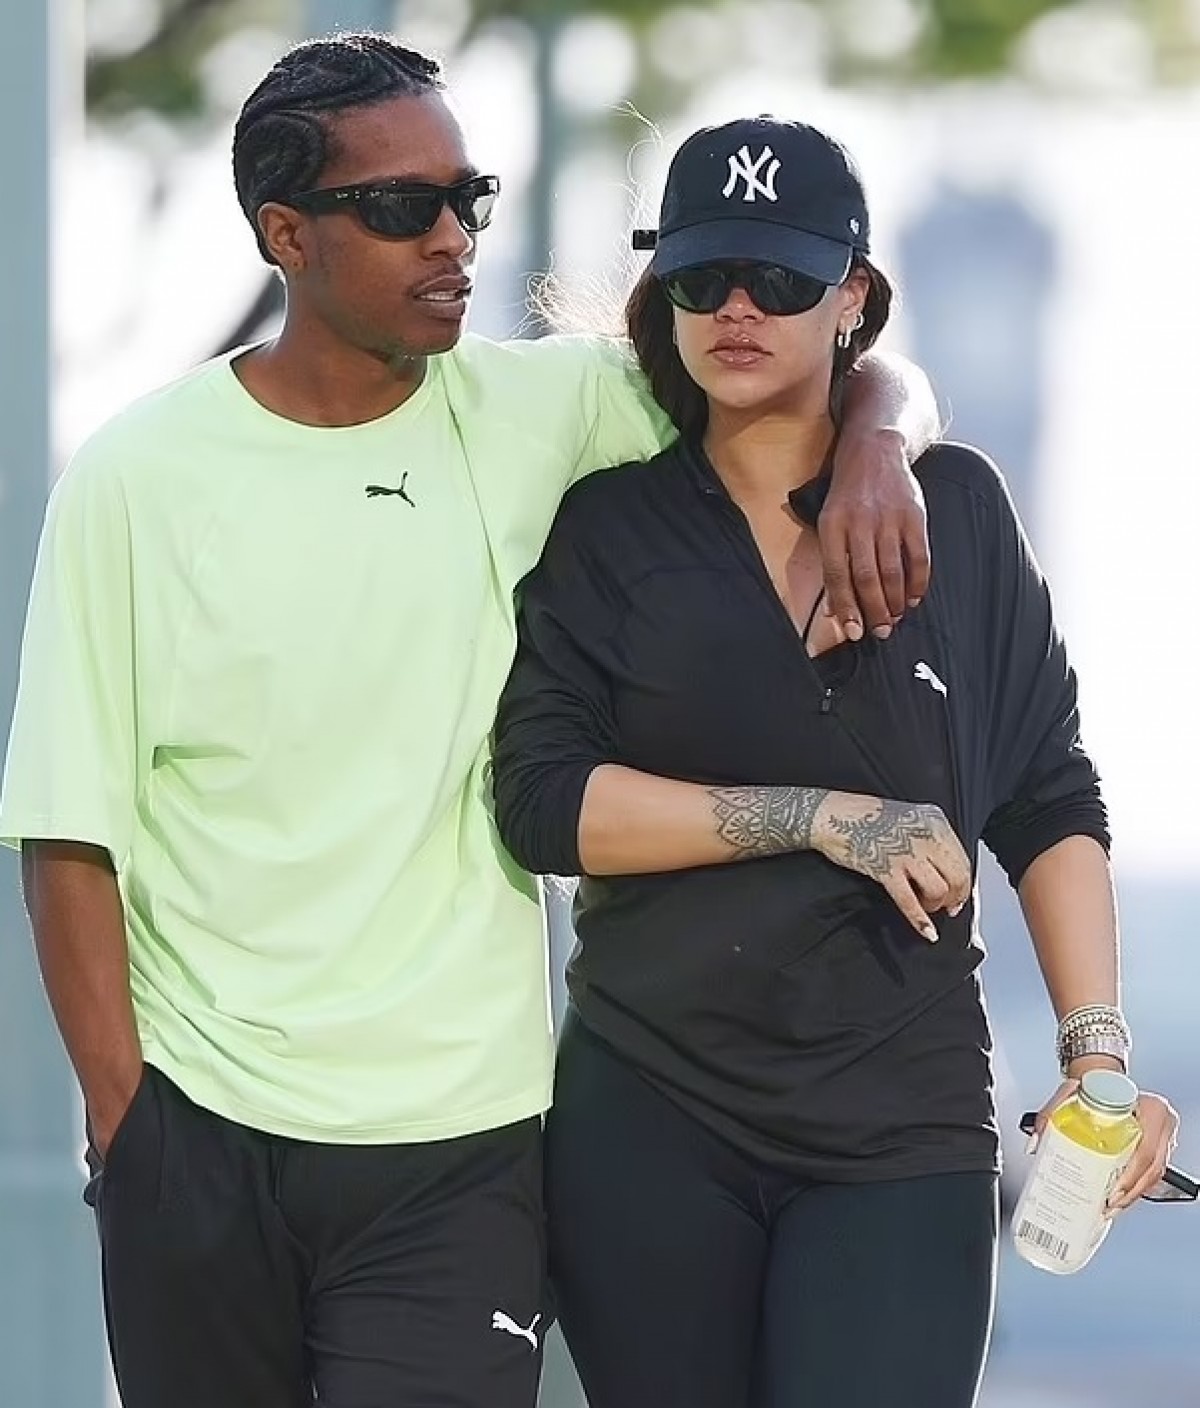 Rihanna and A$AP Rocky Enjoy Morning Walk Together, Pictures Goes Viral!